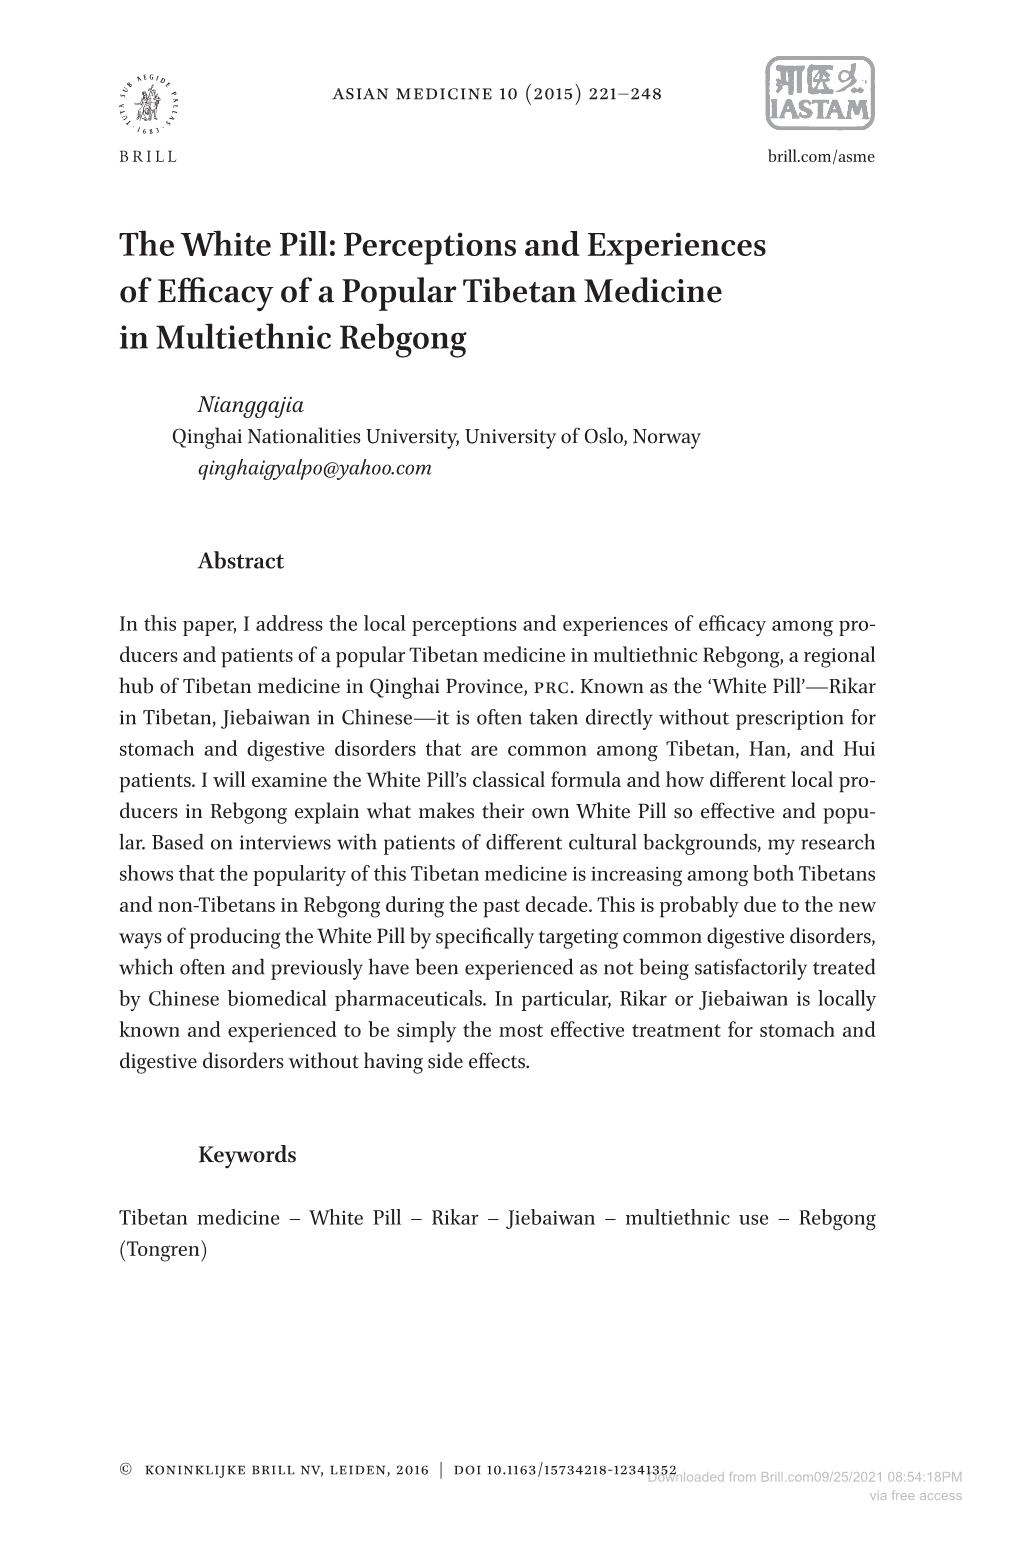 The White Pill: Perceptions and Experiences of Efficacy of a Popular Tibetan Medicine in Multiethnic Rebgong